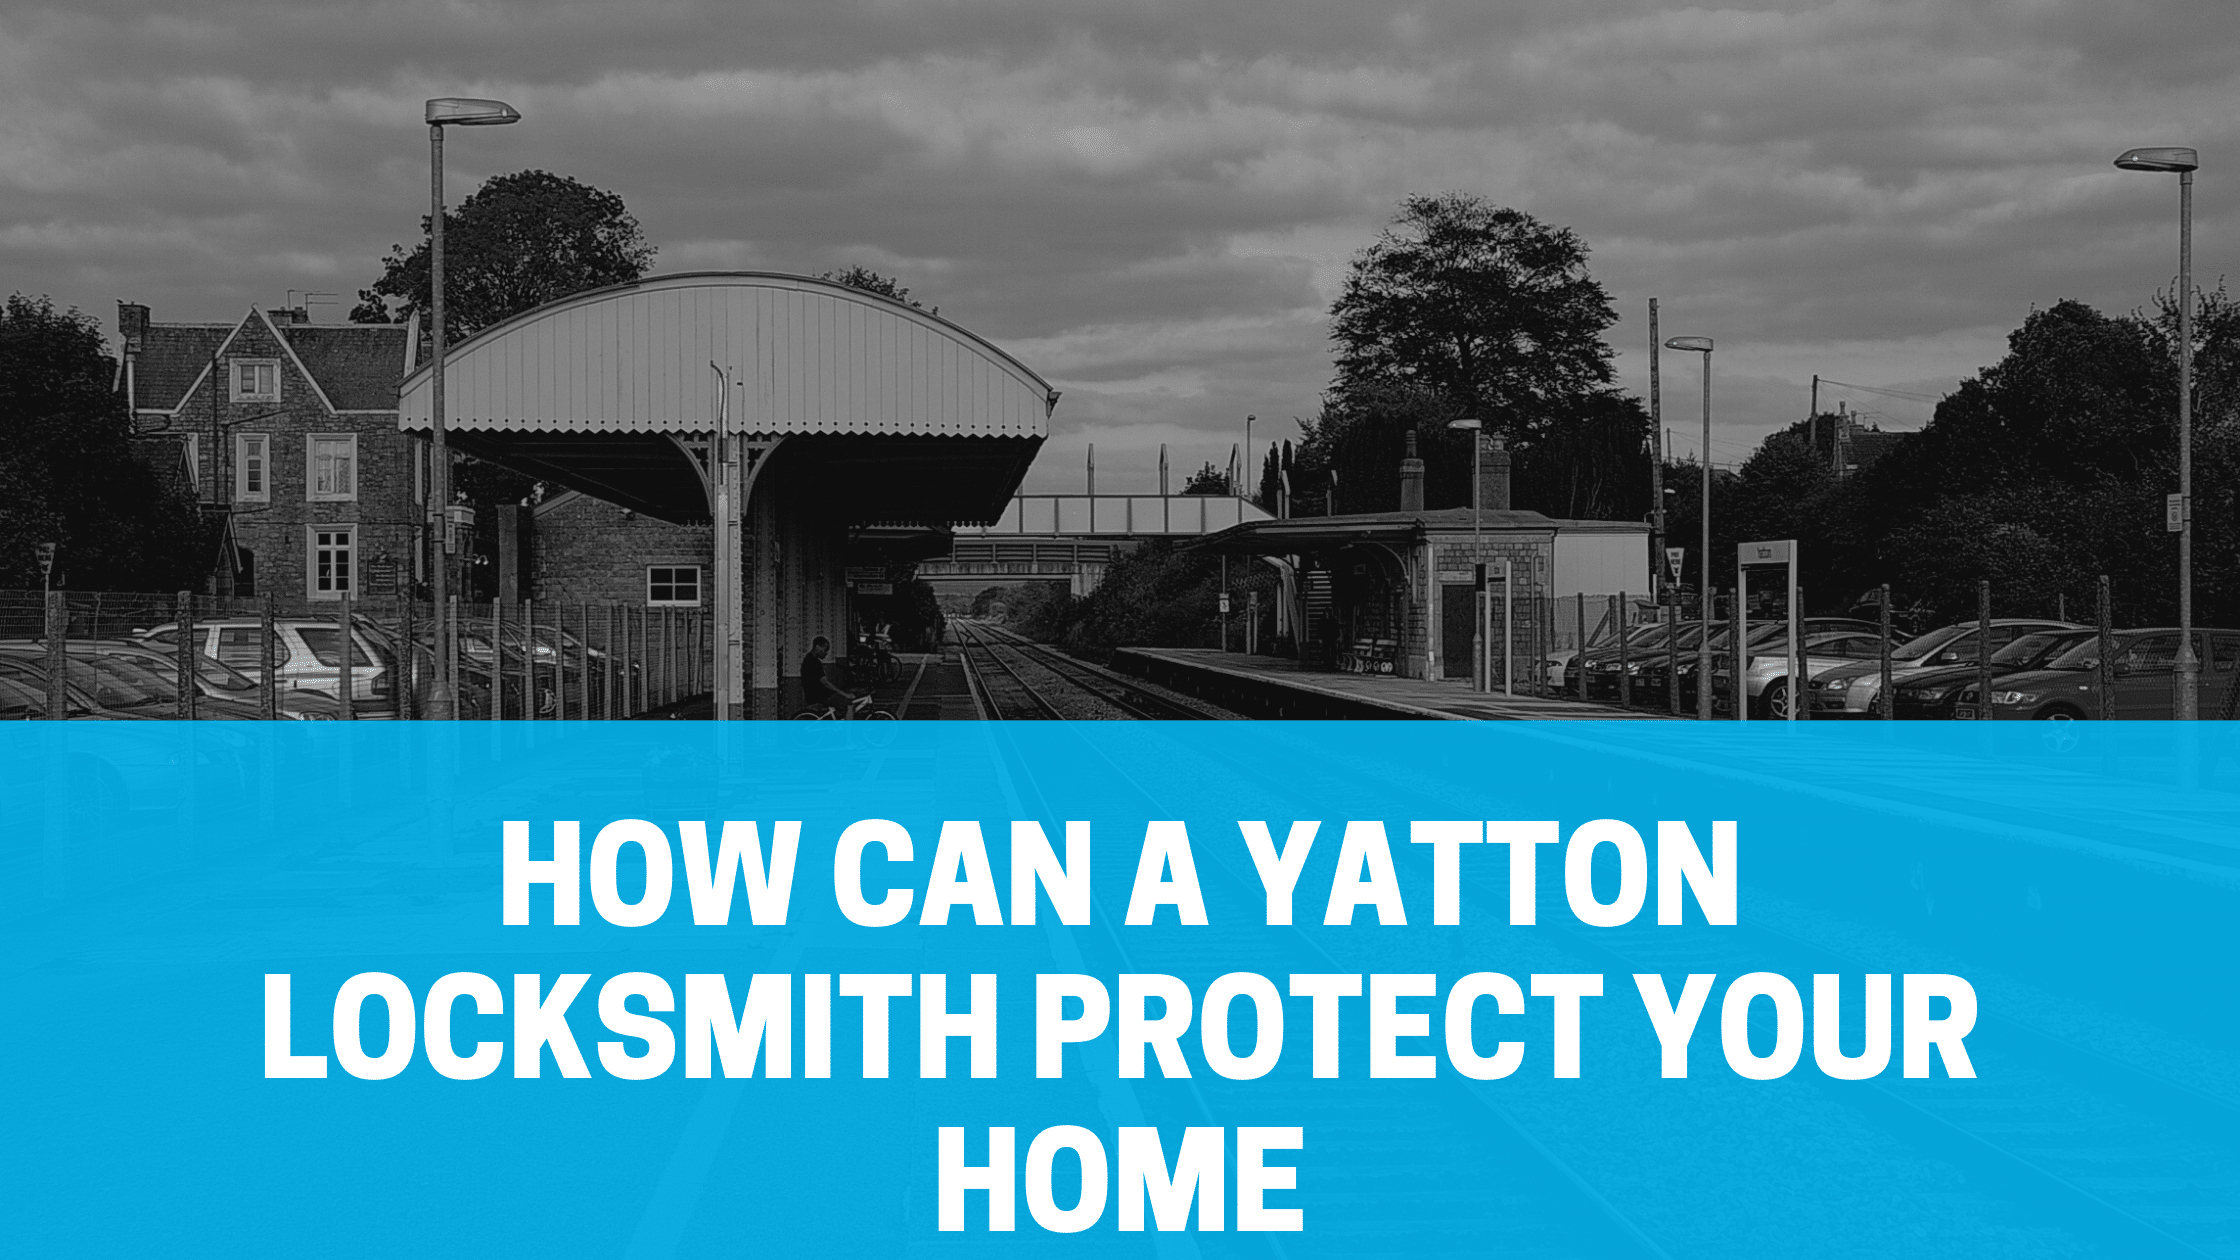 How Can A Yatton Locksmith Protect Your Home?